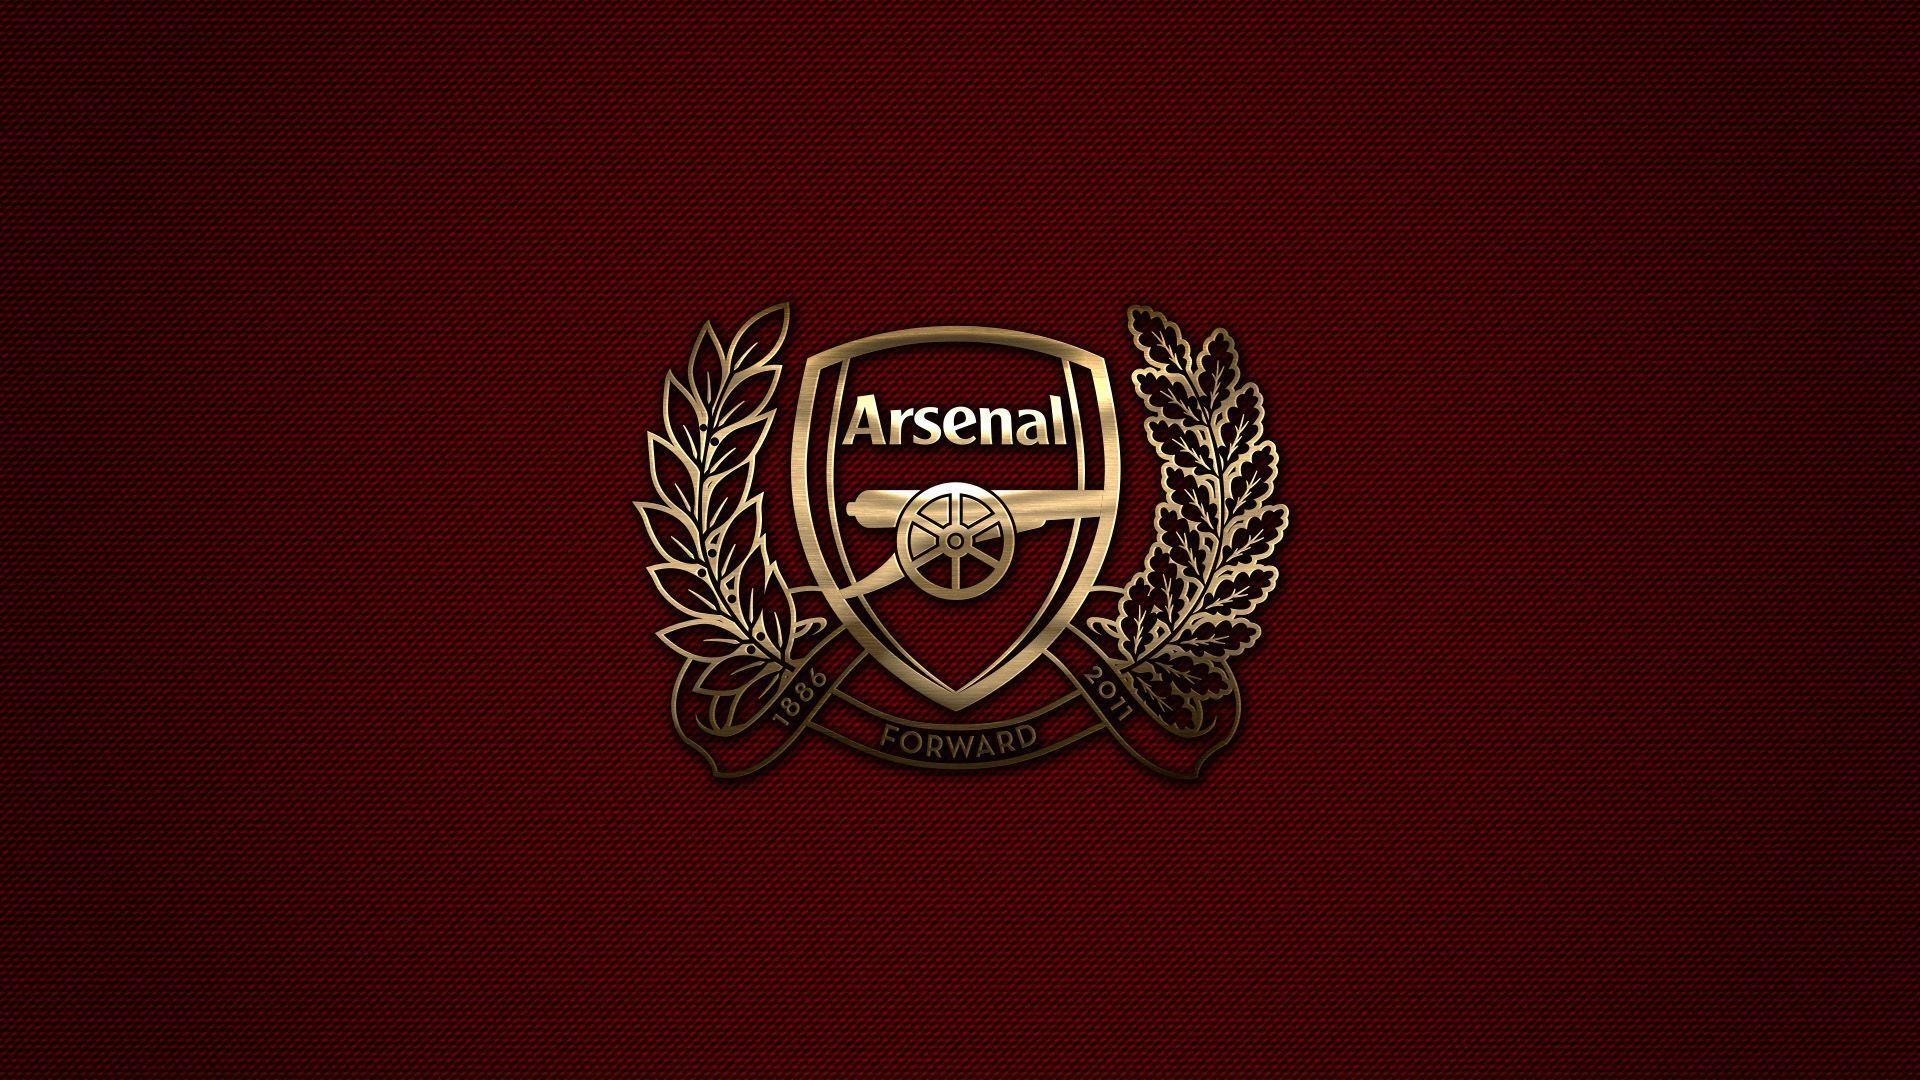 Wallpapers HD Arsenal with resolution 1920x1080 pixel. You can make this wallpaper for your Mac or Windows Desktop Background, iPhone, Android or Tablet and another Smartphone device